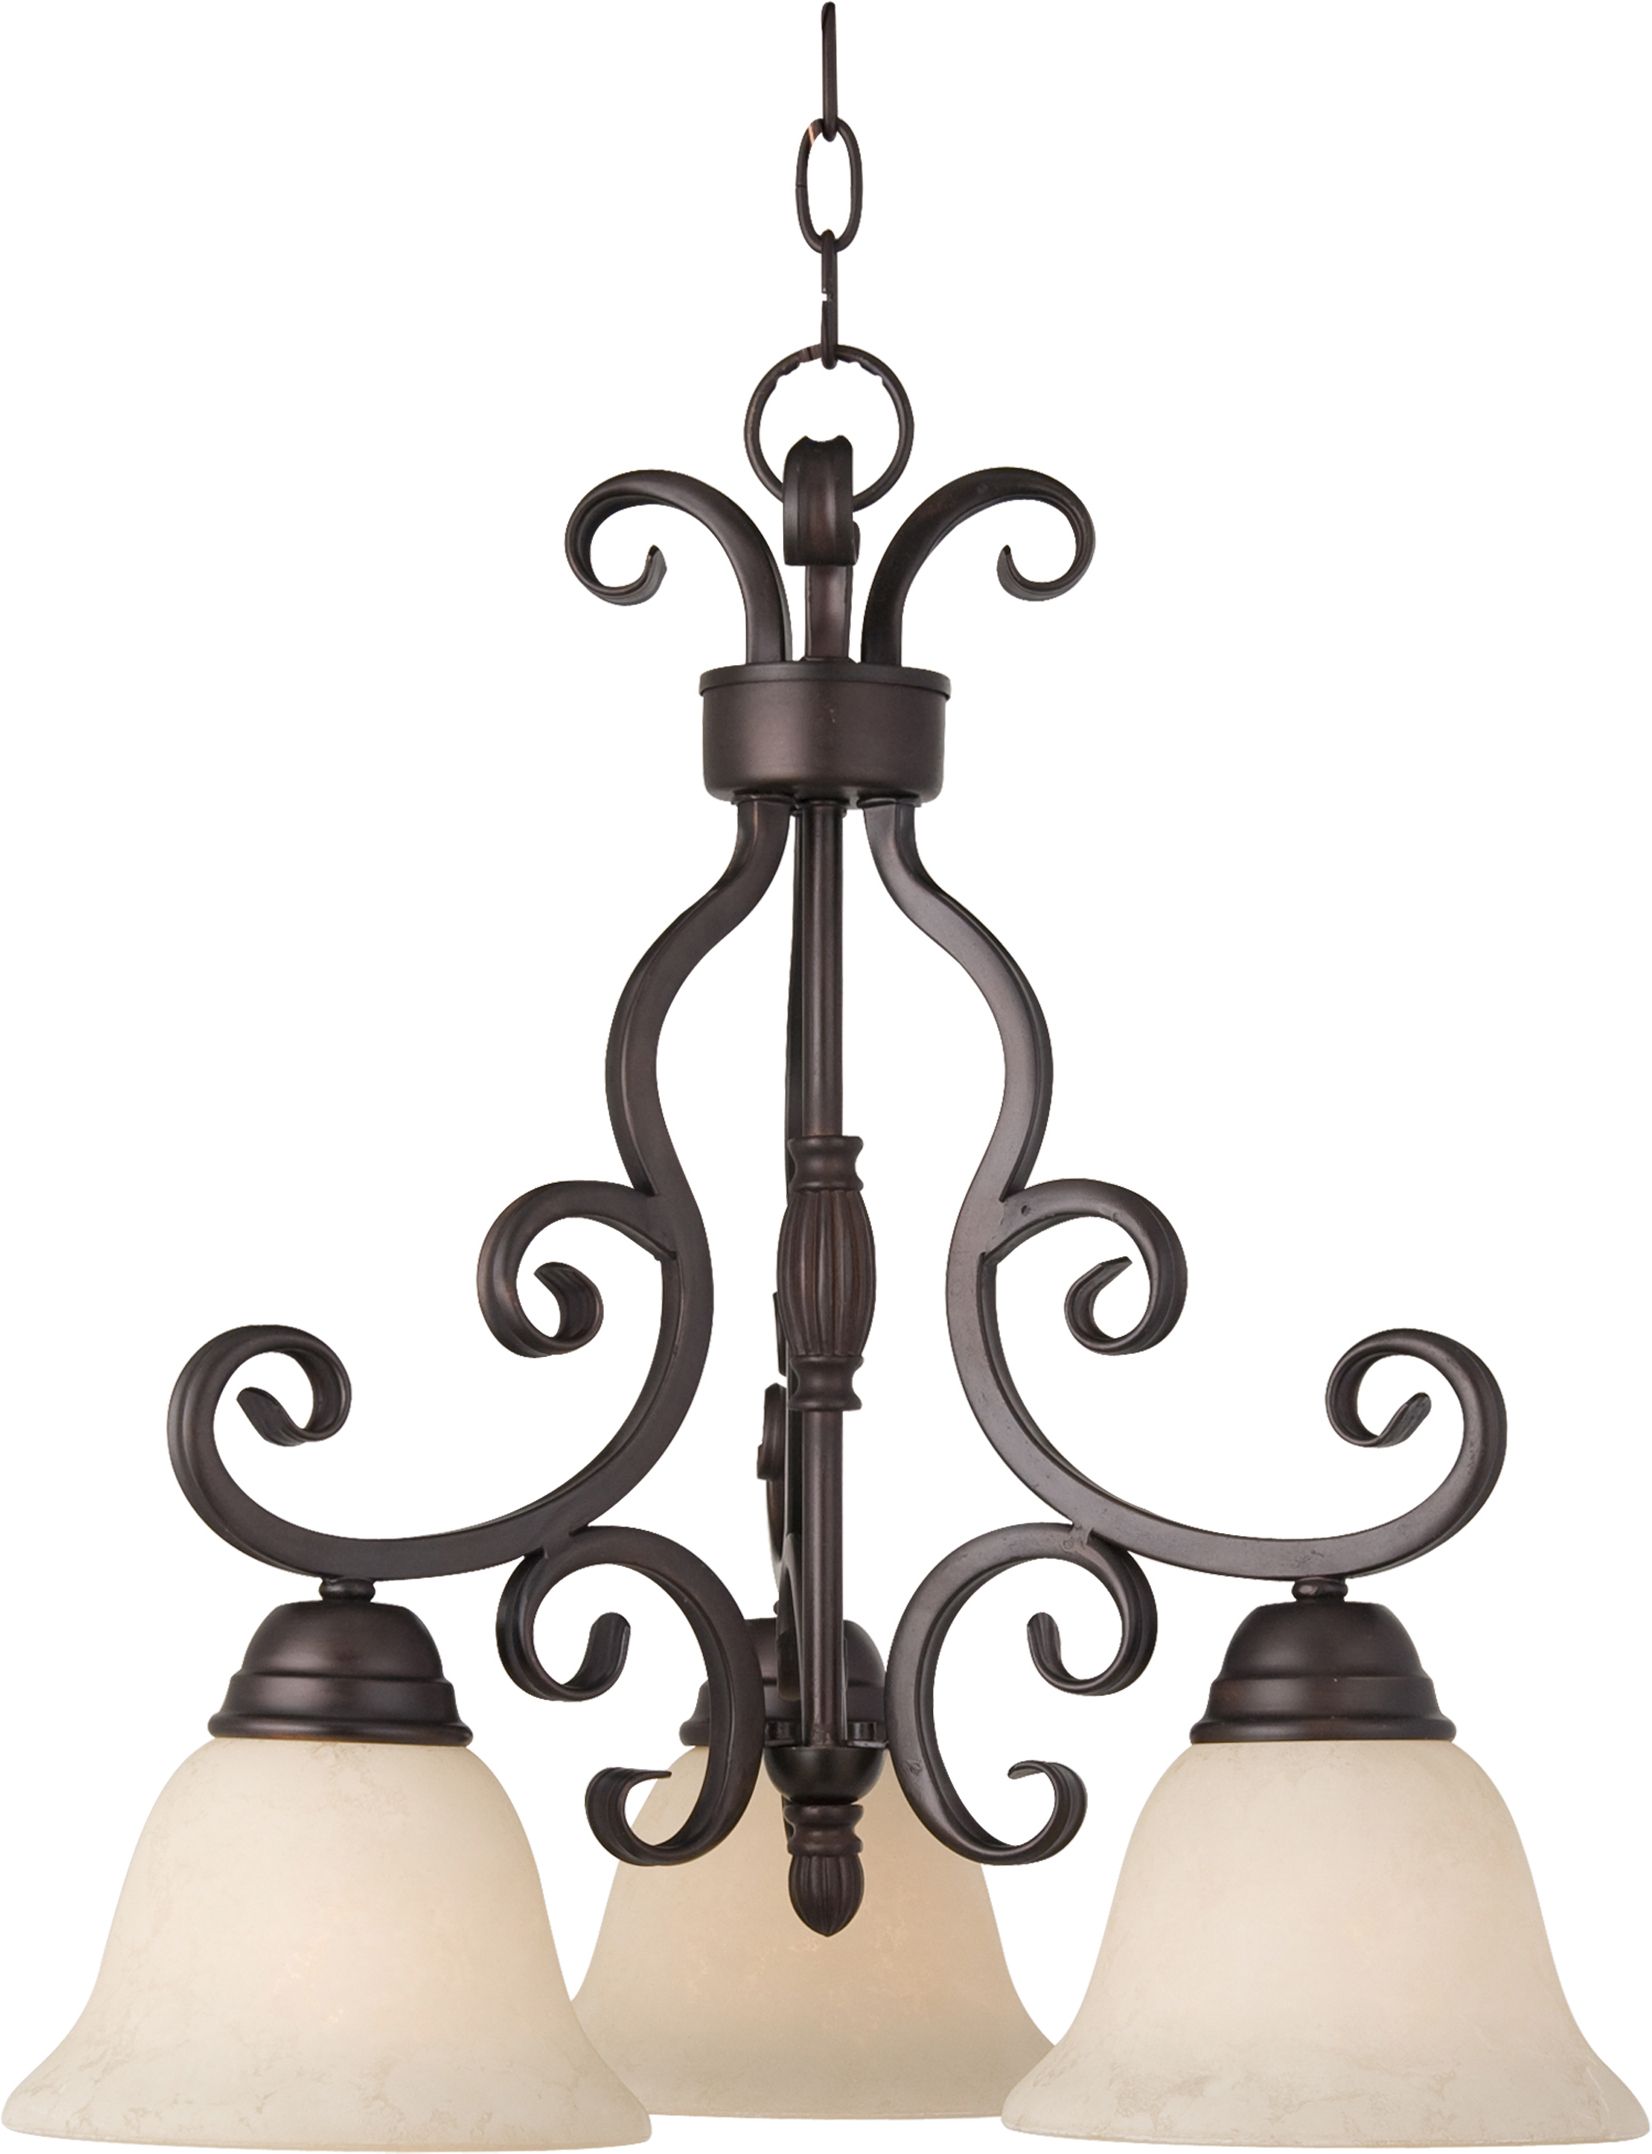 Manor 3 Light Chandelier – Mini Chandelier – Maxim Lighting Pertaining To Most Recently Released 3 Light Pendant Chandeliers (View 6 of 20)